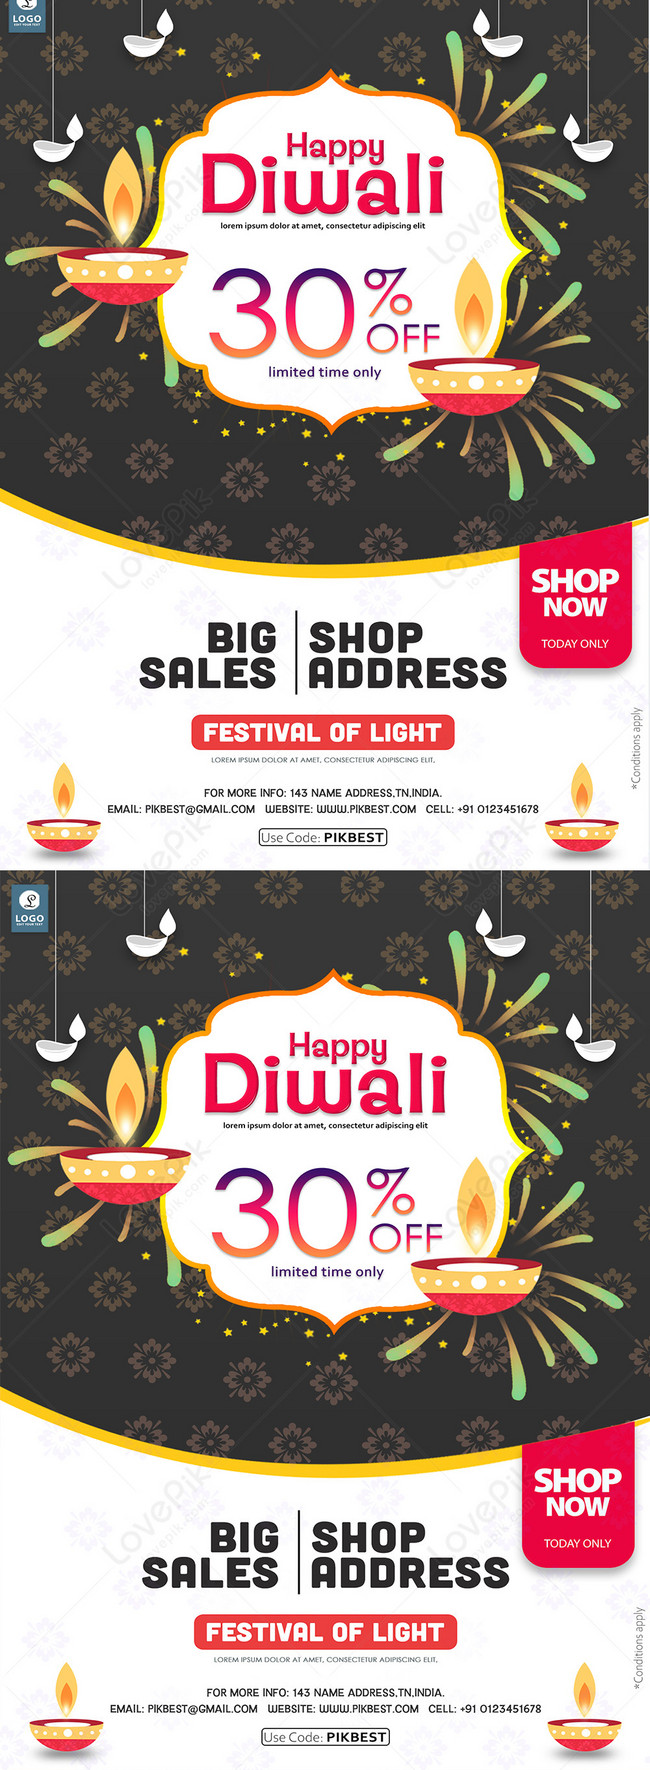 Reliance Digital's Festival of Electronics: Mega discounts, irresistible  offers and more await you - The Economic Times